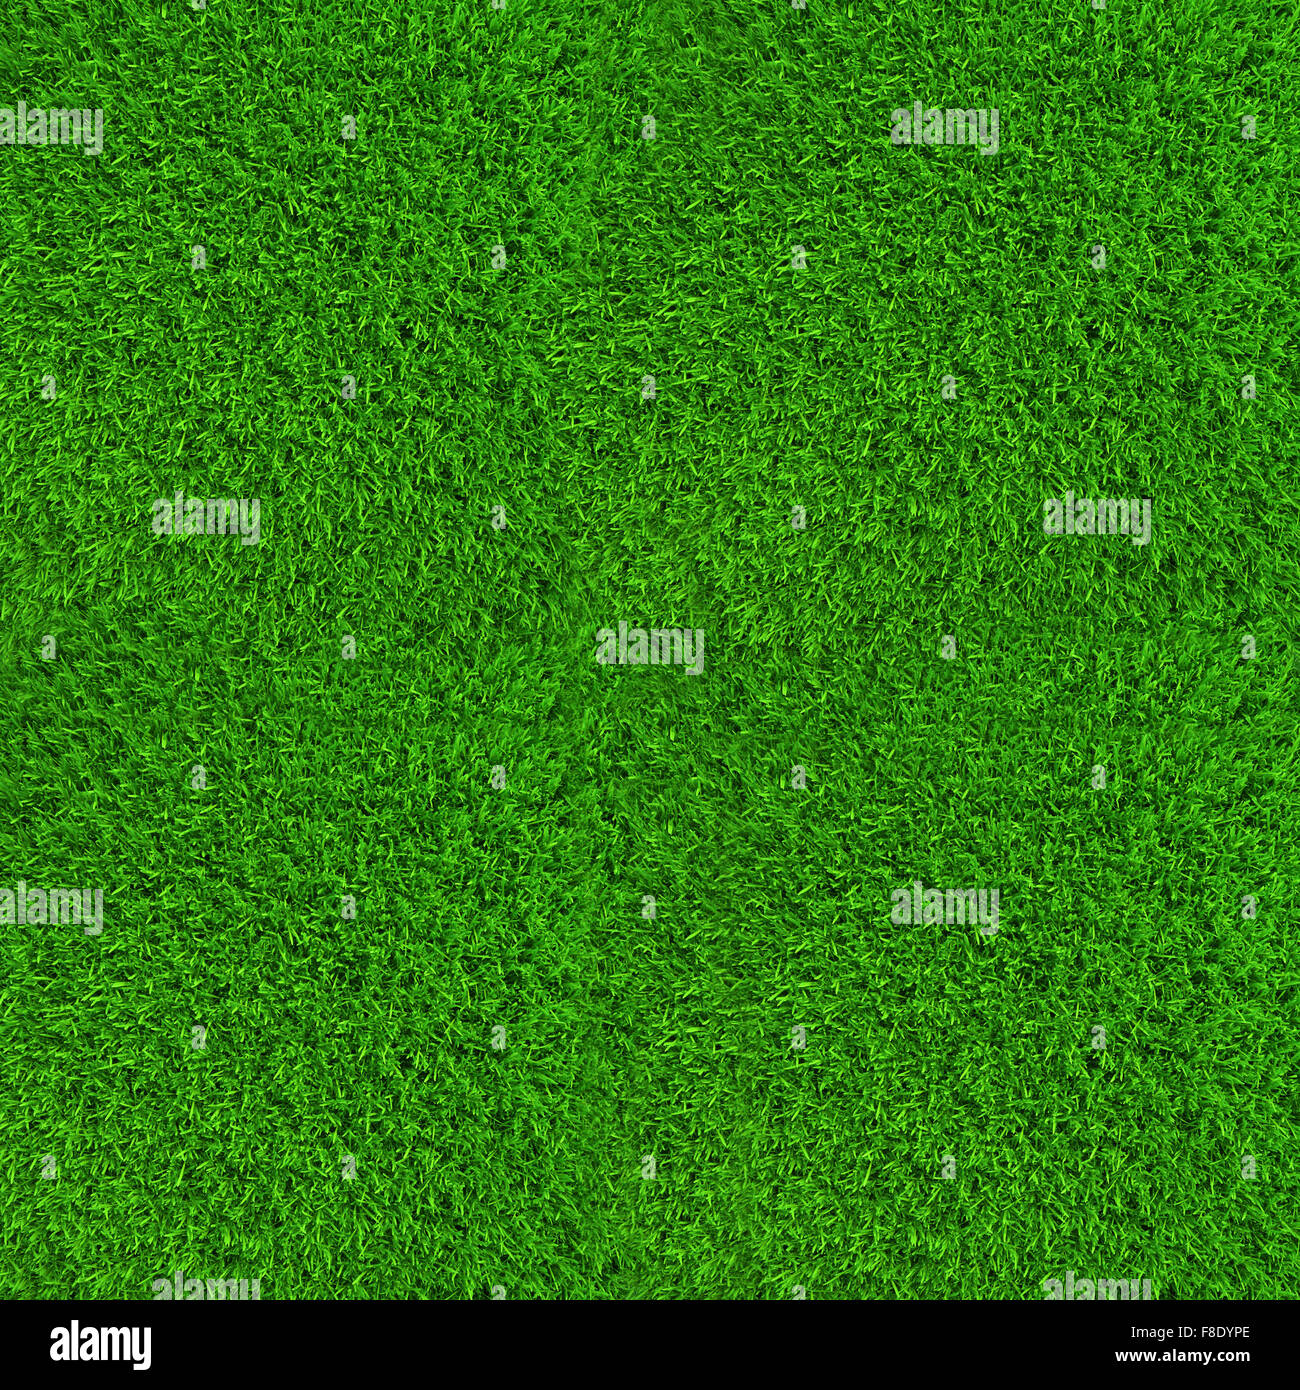 Green lawn grass background texture high resolution Stock Photo